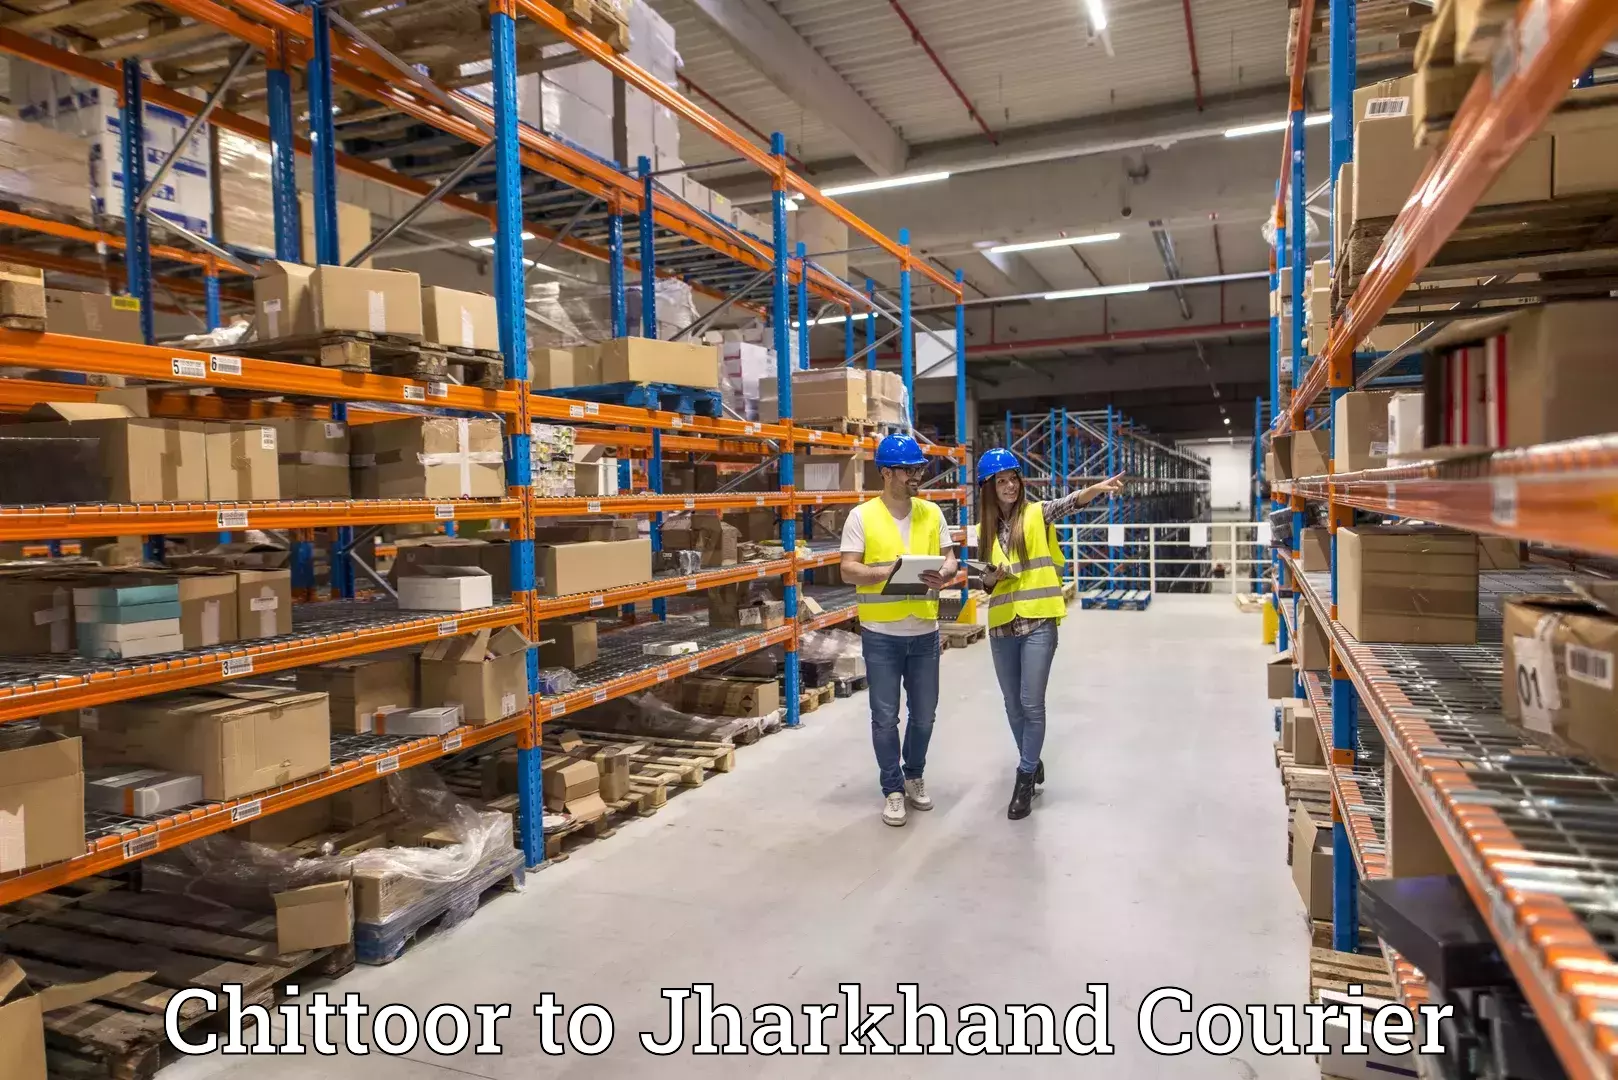 High-performance logistics in Chittoor to Jharkhand